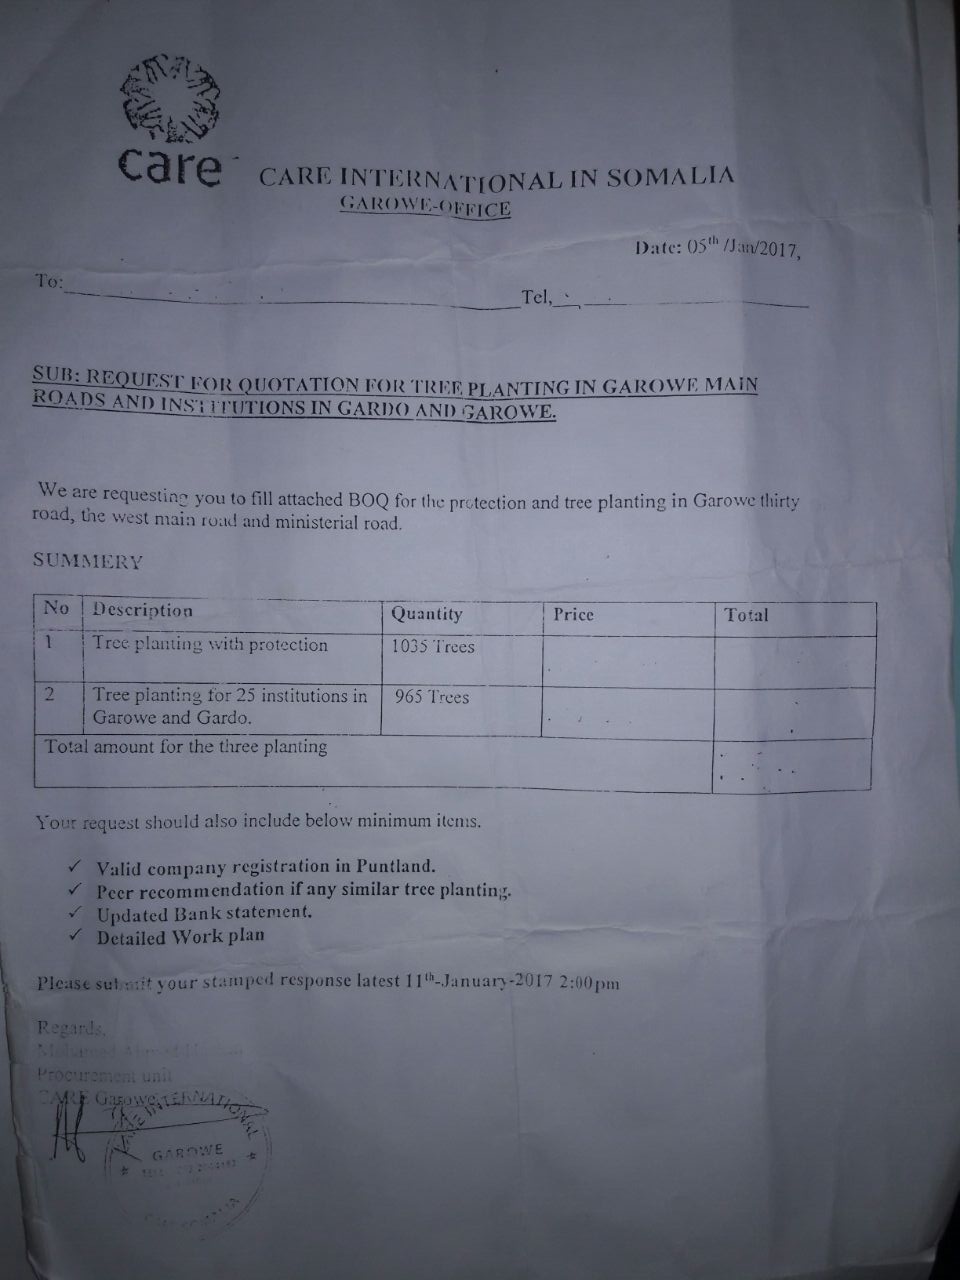 Quotation Request Letter for Planting Garowe main roads and institutions from Garowe International, Puntland office with the signature of the agency’s head of procurement, Mohamed Ibrahim Hassan. [Photo: Puntland Mirror]